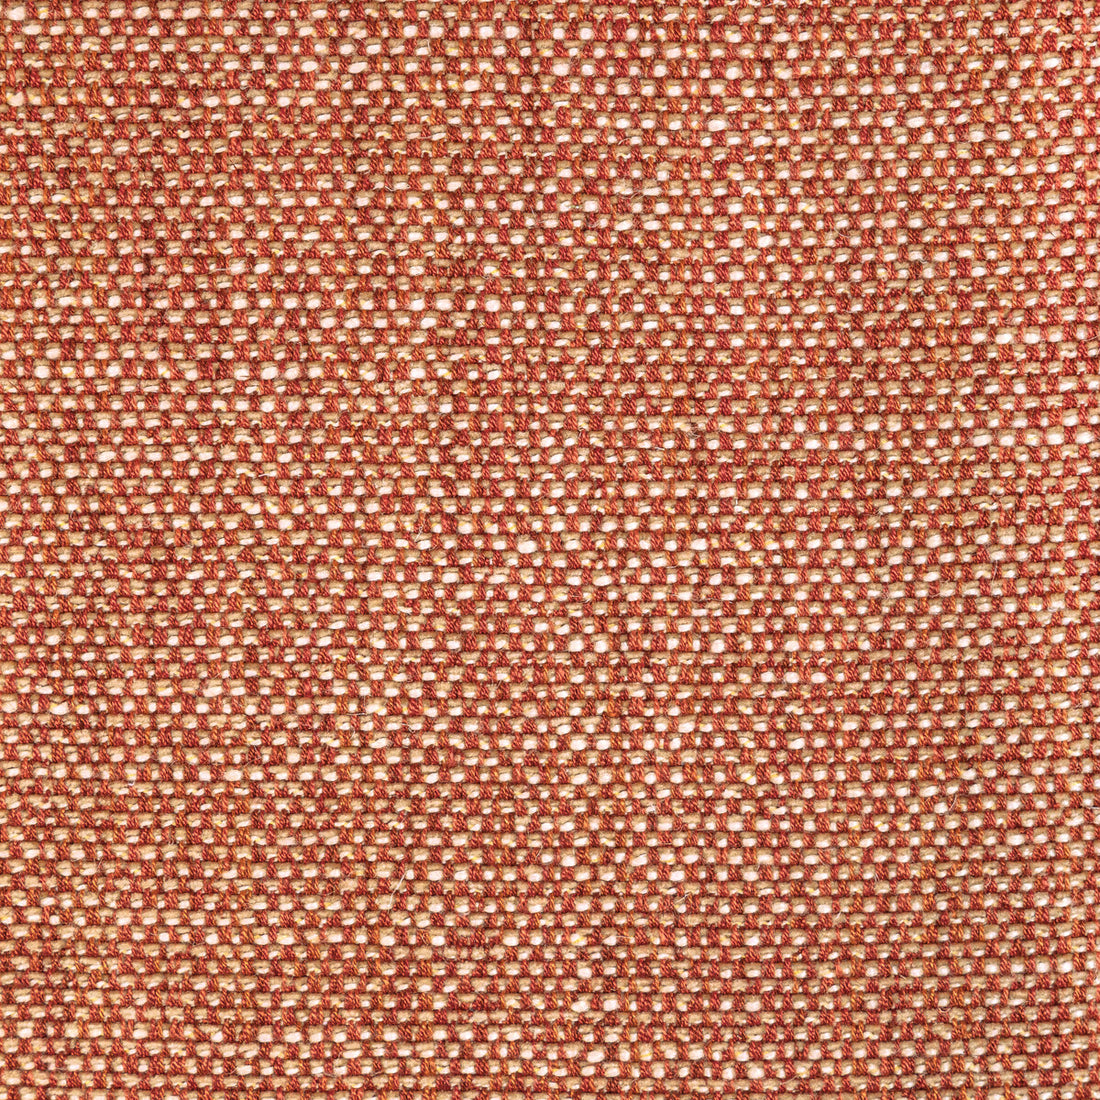 Edern Plain fabric in spice color - pattern 8022109.12.0 - by Brunschwig &amp; Fils in the Lorient Weaves collection